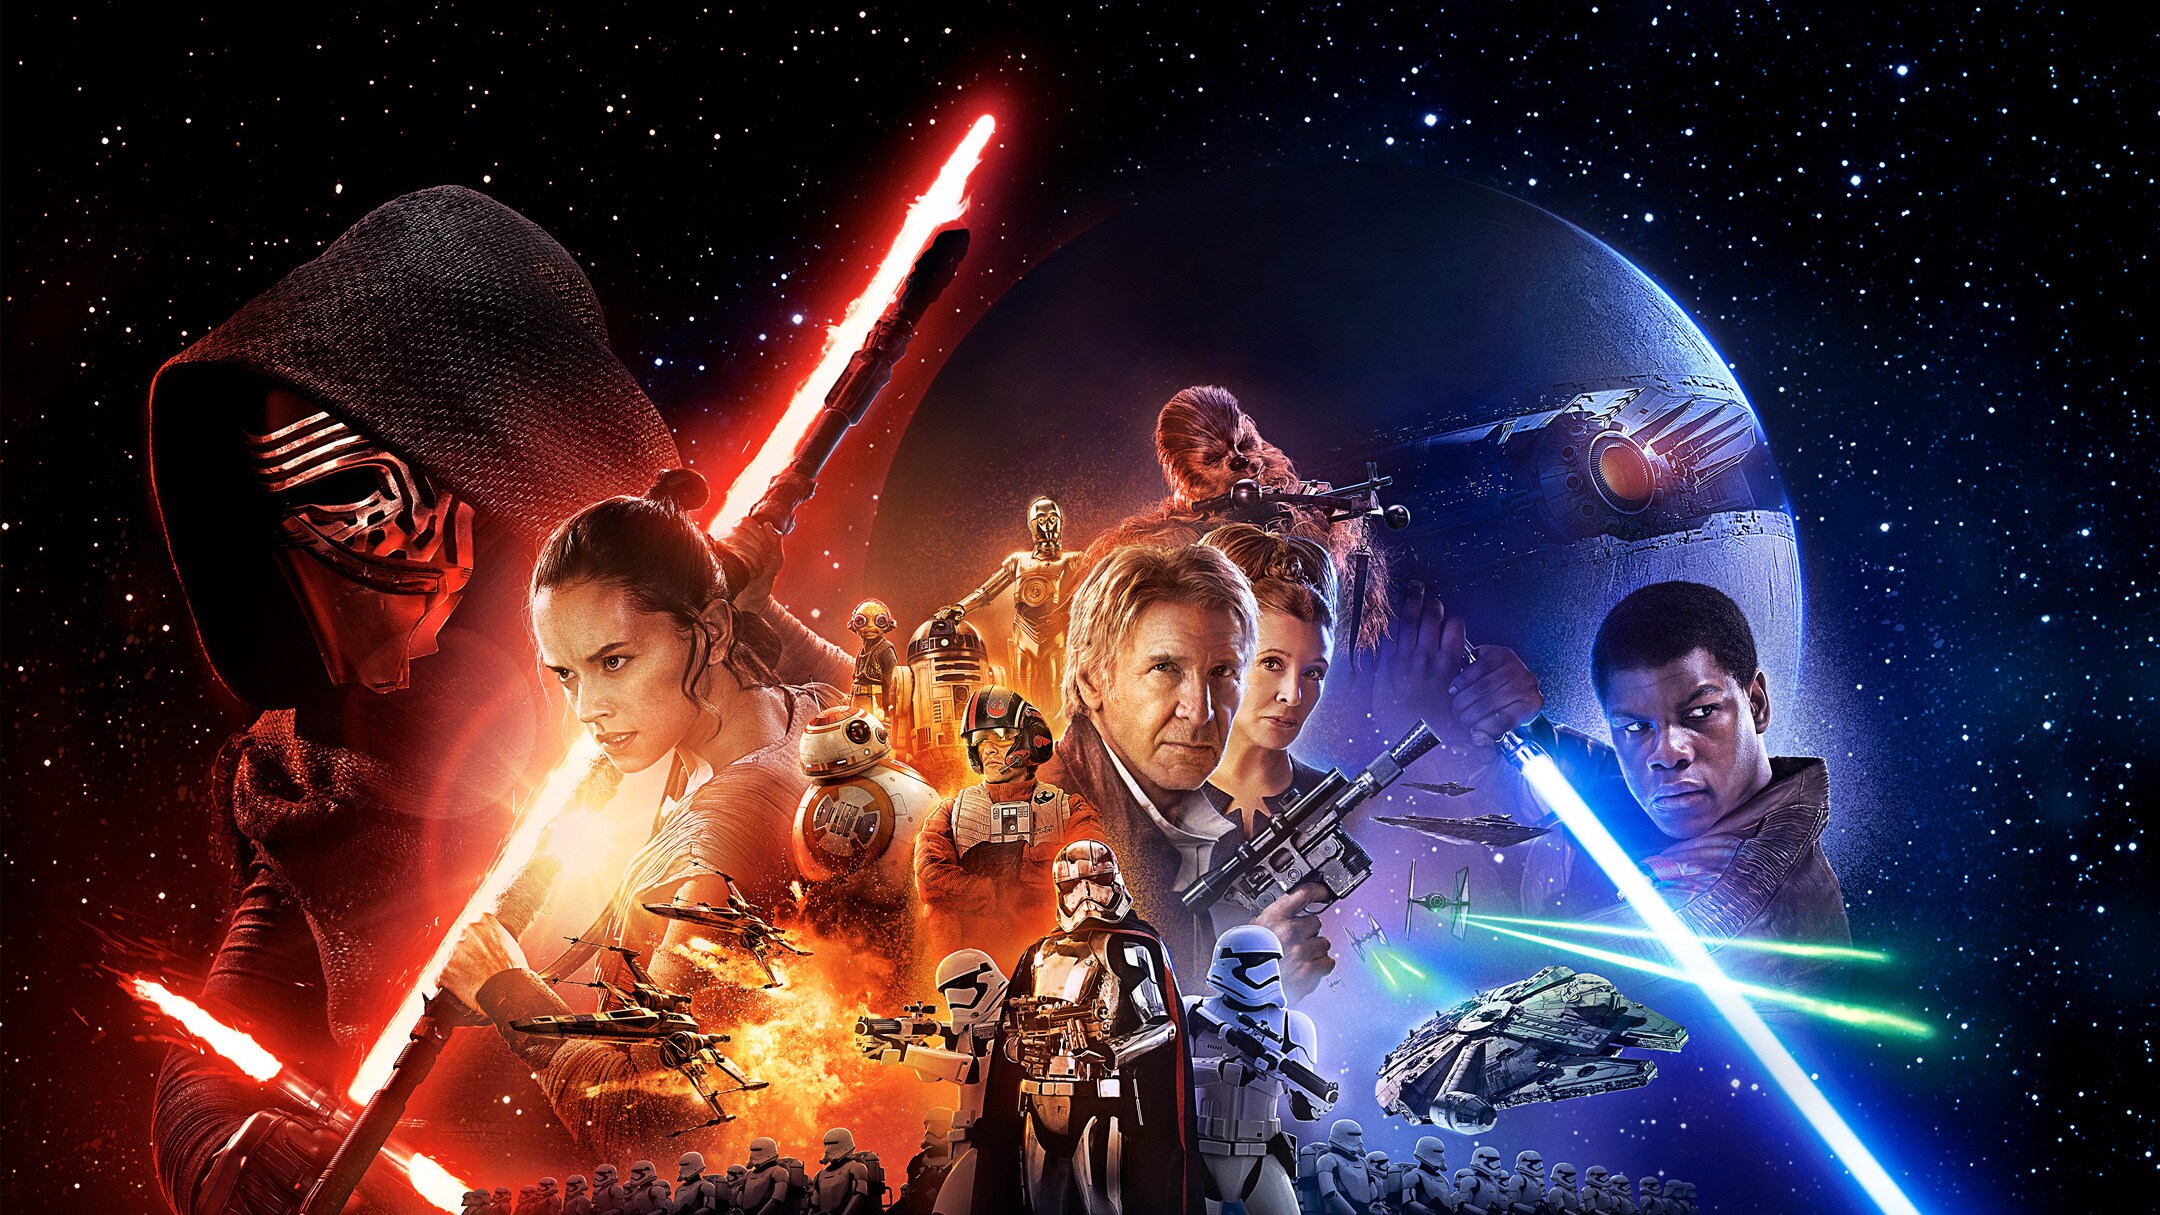 Star Wars: The Force Awakens Theatrical Poster First Look, In